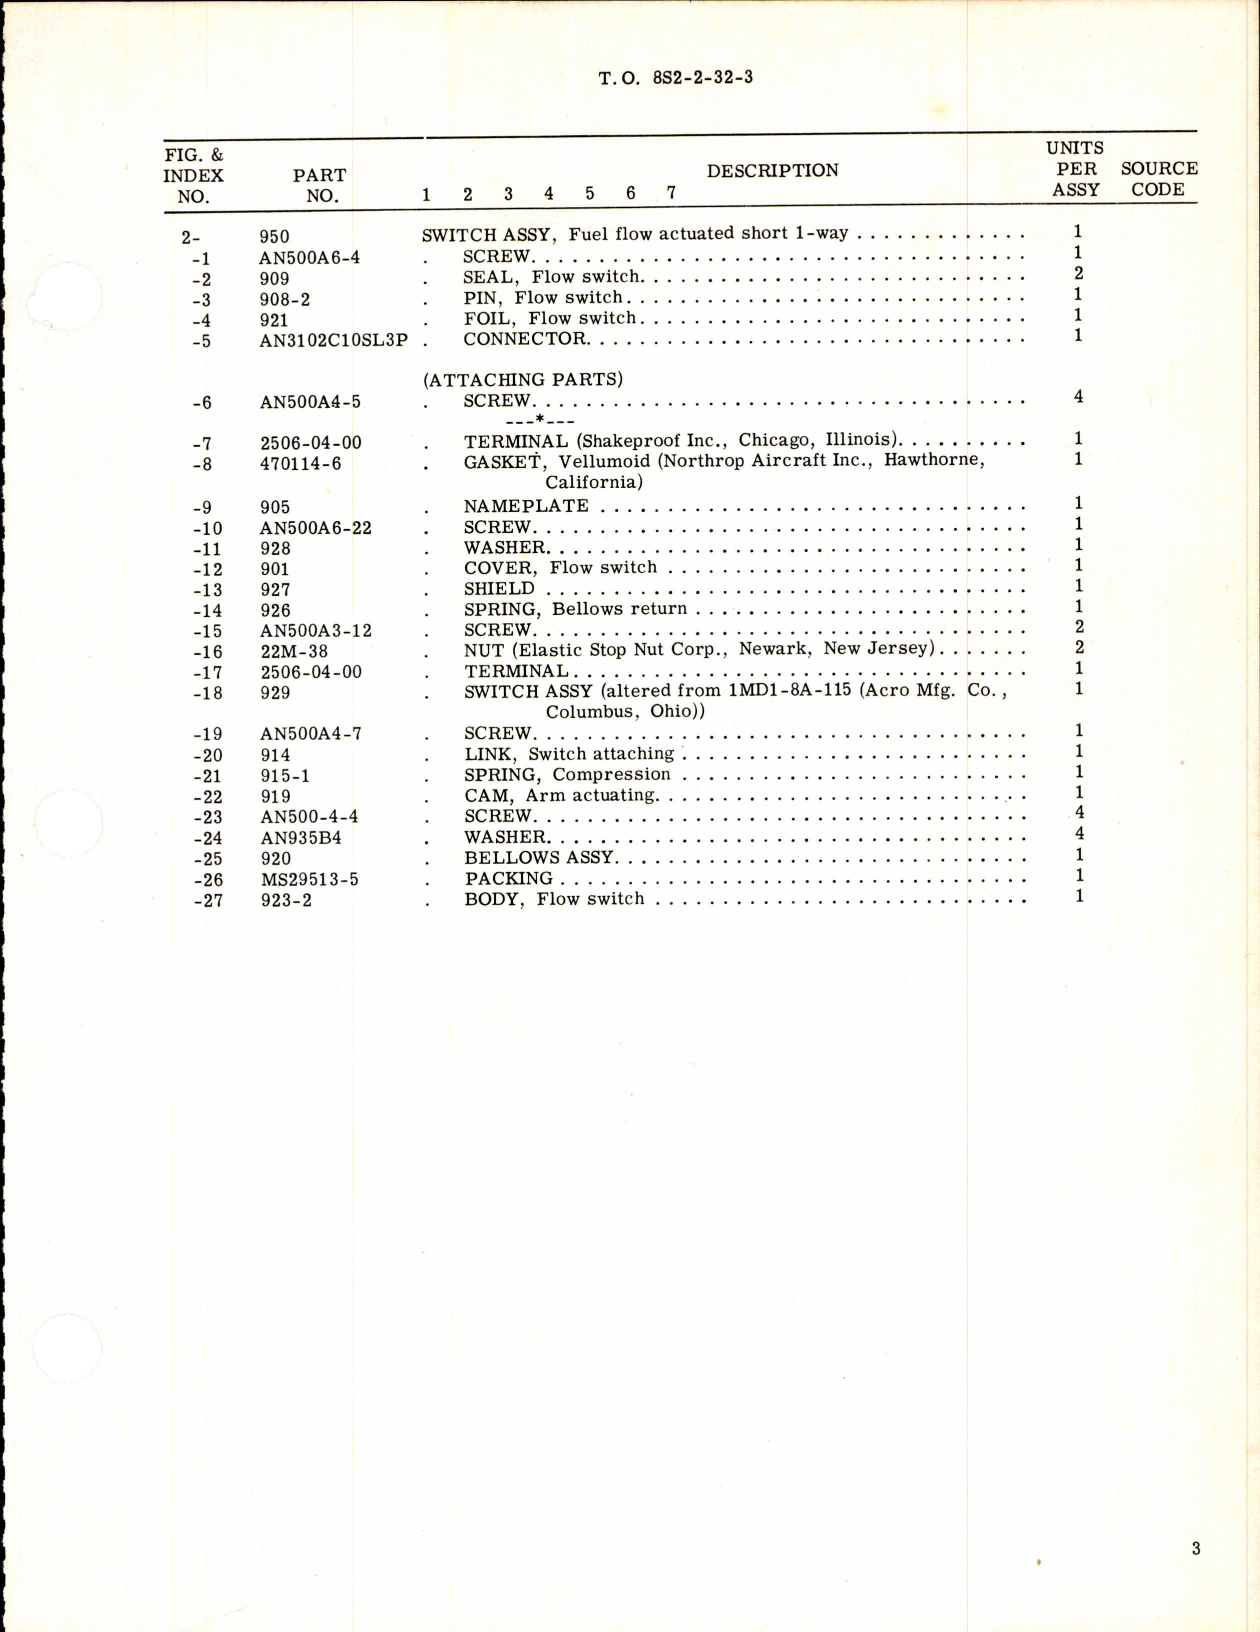 Sample page 3 from AirCorps Library document: Fuel Flow Actuated Short 1-Way Switch Part No 950